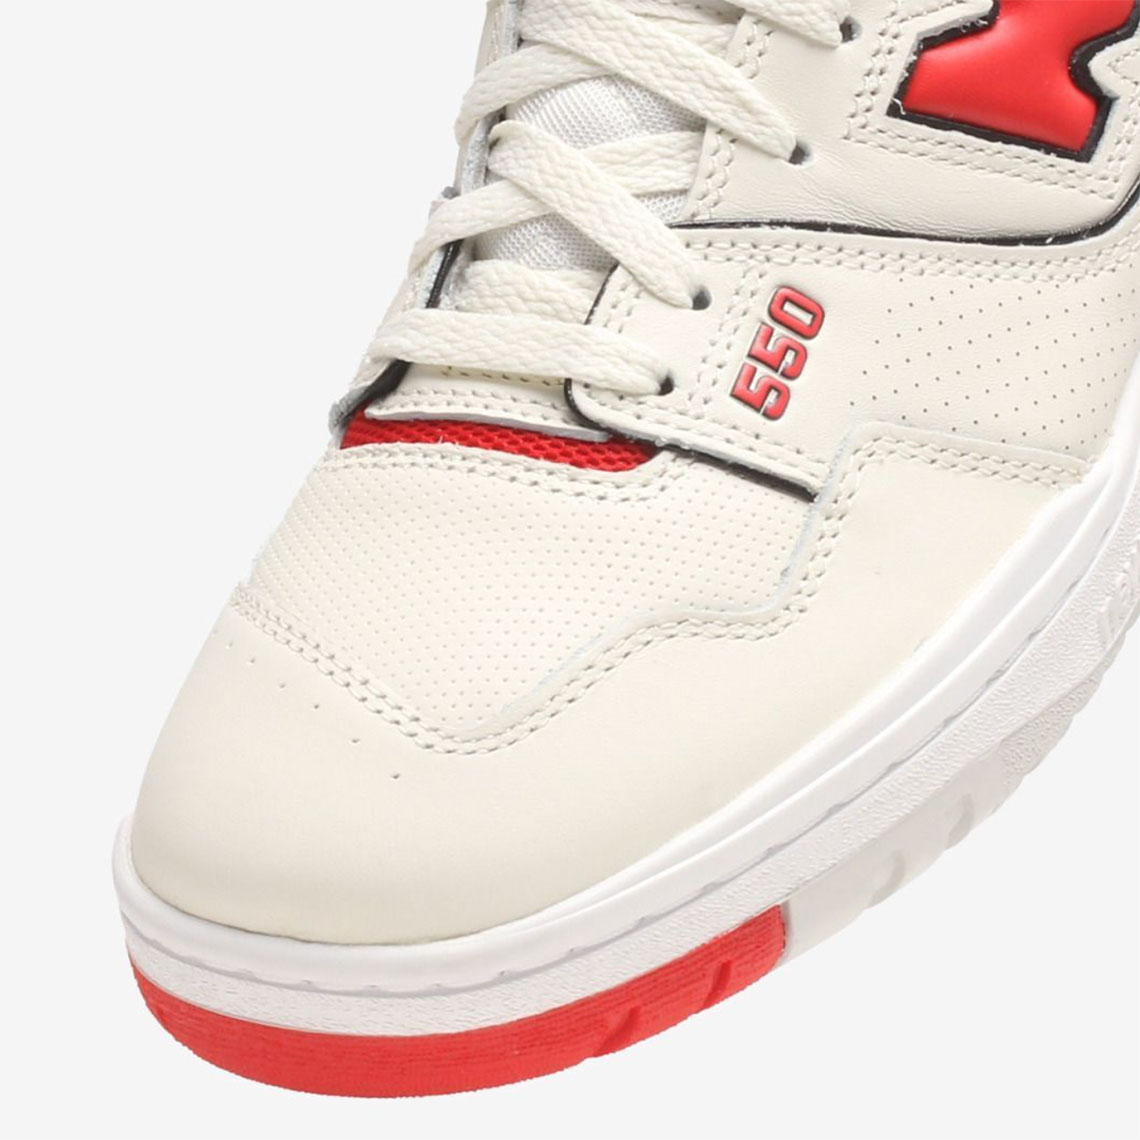 New Balance 550 Off-White Chile Red BB550VTB | SneakerNews.com